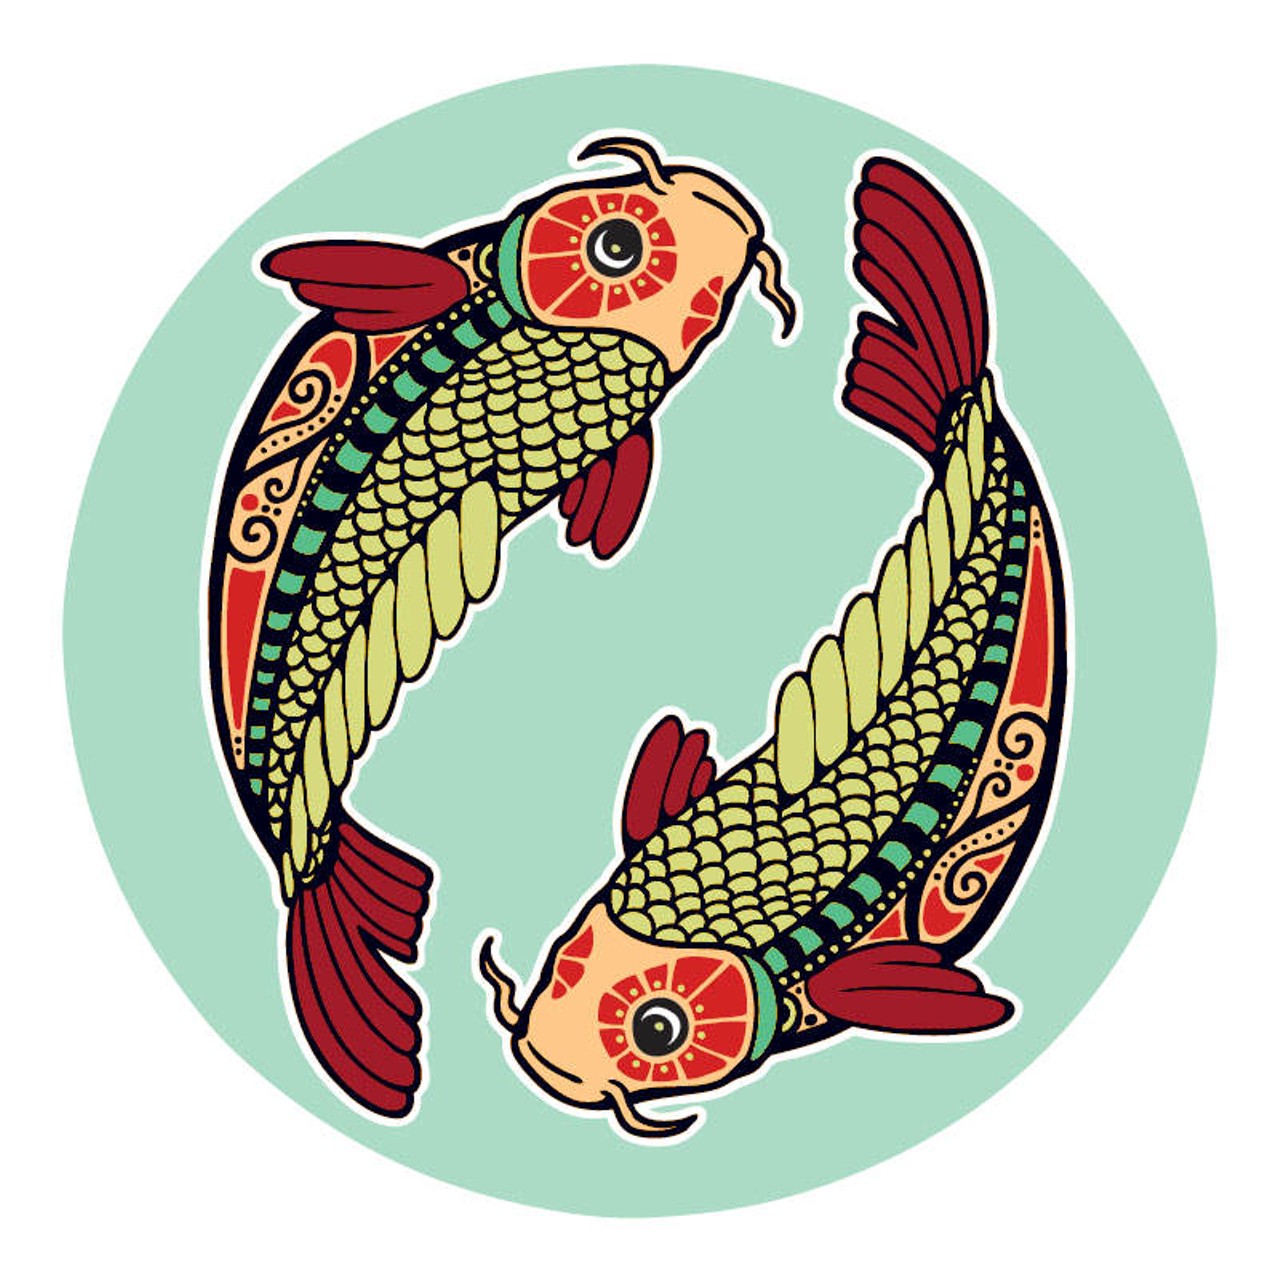 PISCES (Feb. 21-March 20): 
Between the stuff that&#146;s been going on, and the stuff that&#146;s come up in the last few weeks, suddenly there are a million choices to make. Too many options only gets messy when we don&#146;t know what we want. You&#146;re pretty clear about this. Whatever form it takes, you want it to be easy, and fun, and profitable! Others keep telling you not to expect too much; take it with a grain of salt. While it&#146;s always good to be realistic, you&#146;d be stupid to let anyone put a damper on all of these possibilities. As long as your heart and your motives are clear, you can&#146;t lose at anything right now.